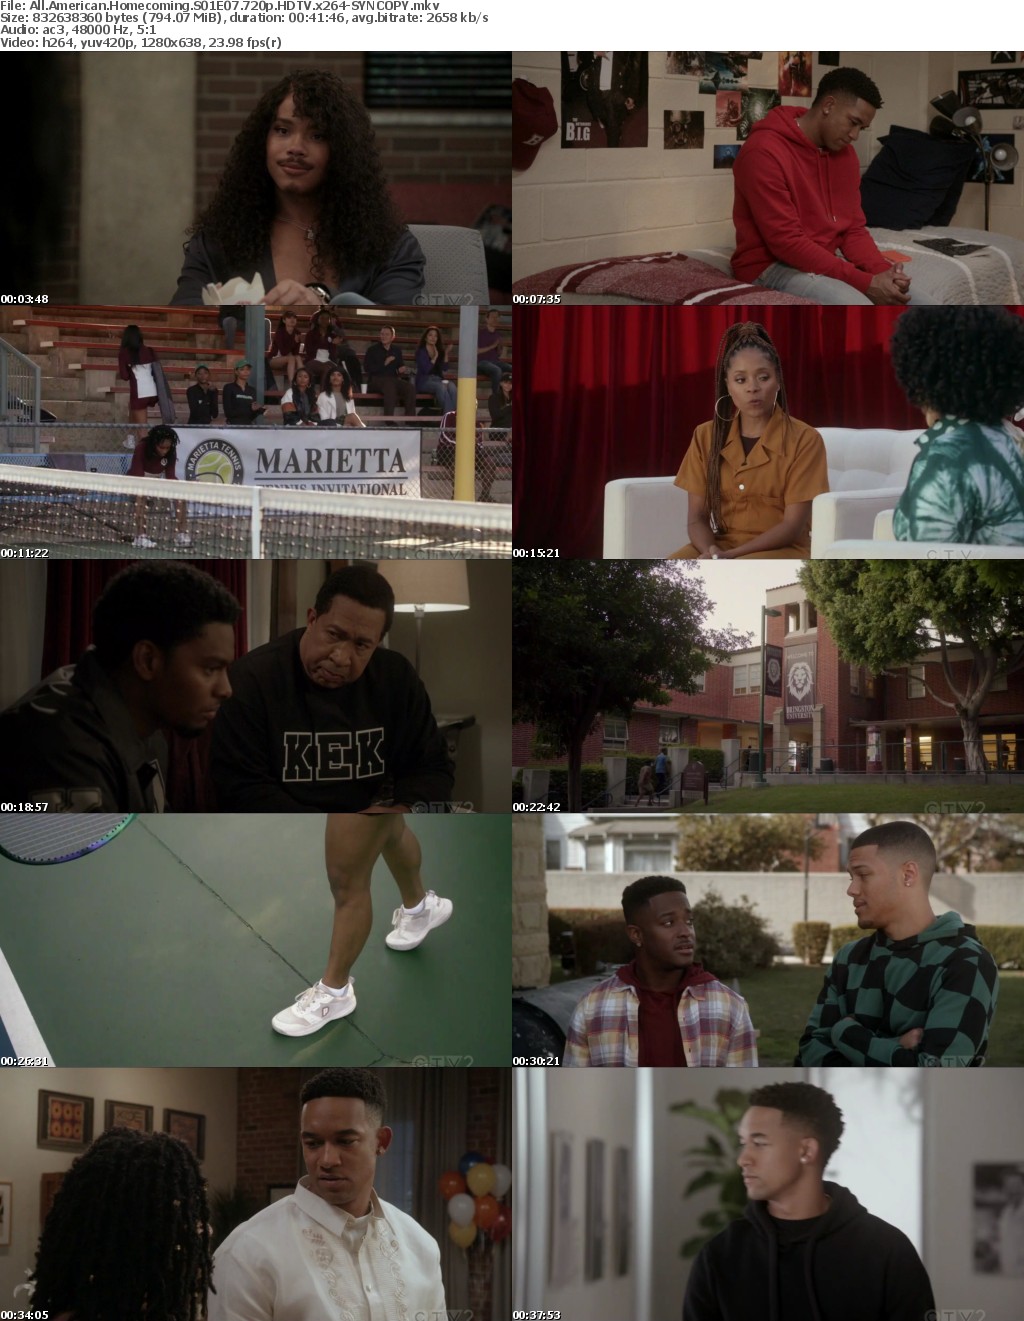 All American Homecoming S01E07 720p HDTV x264-SYNCOPY